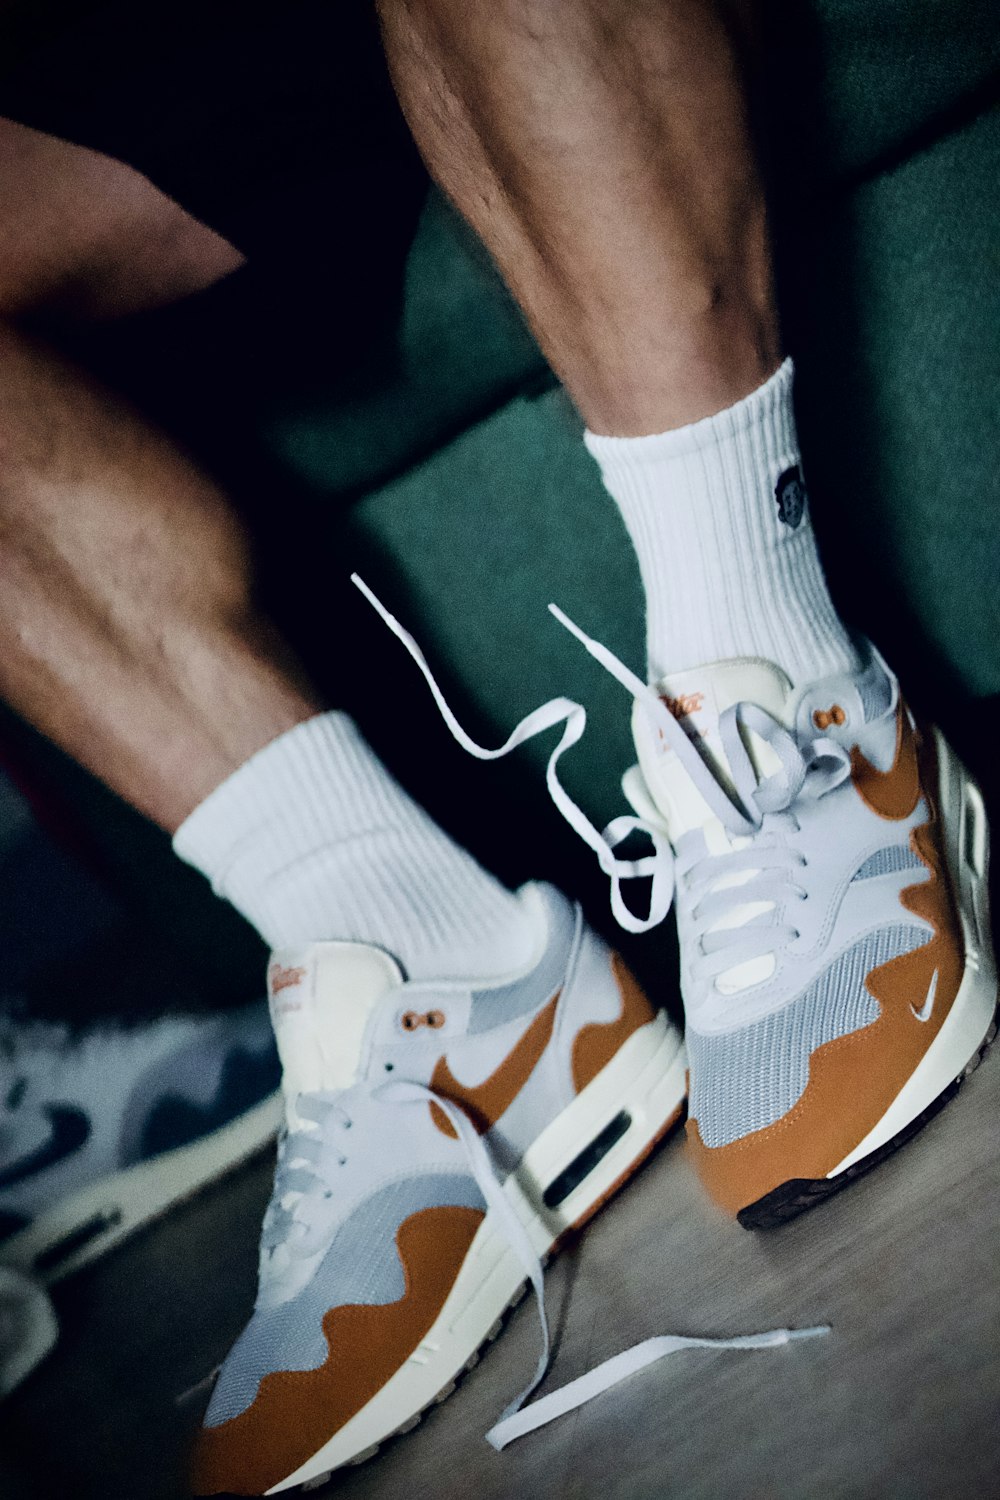 a close up of a person's feet wearing white and orange sneakers